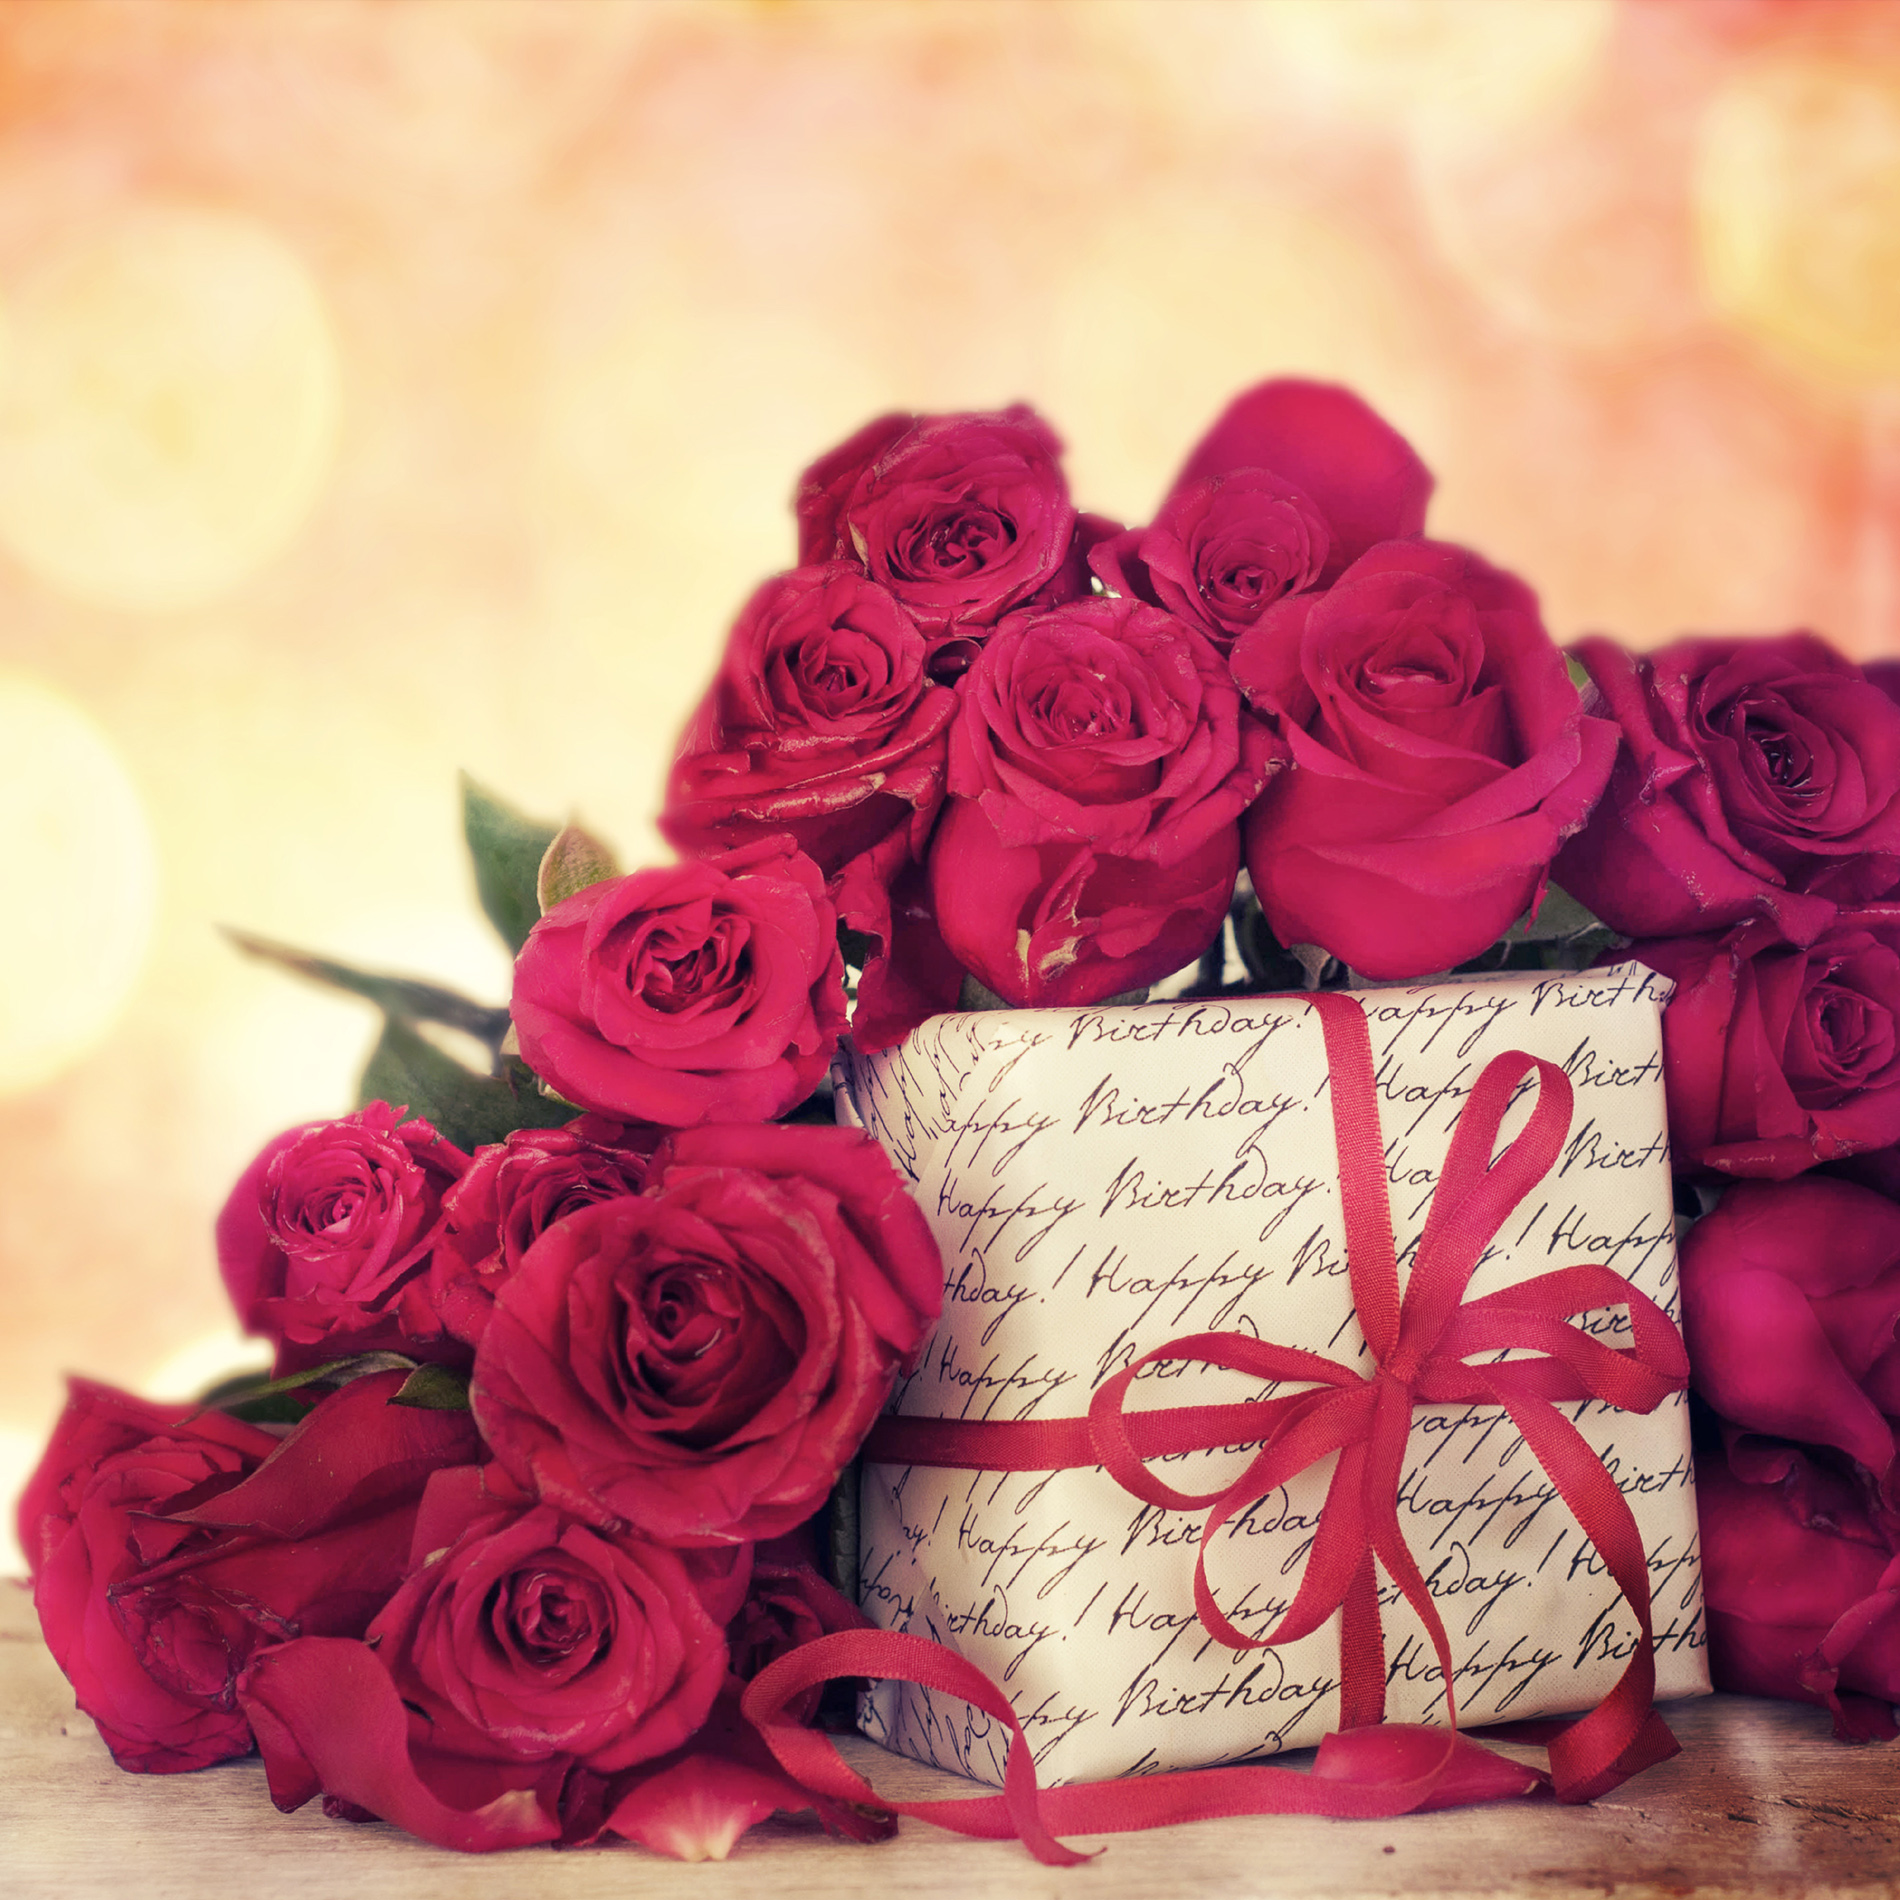 Rose gifts